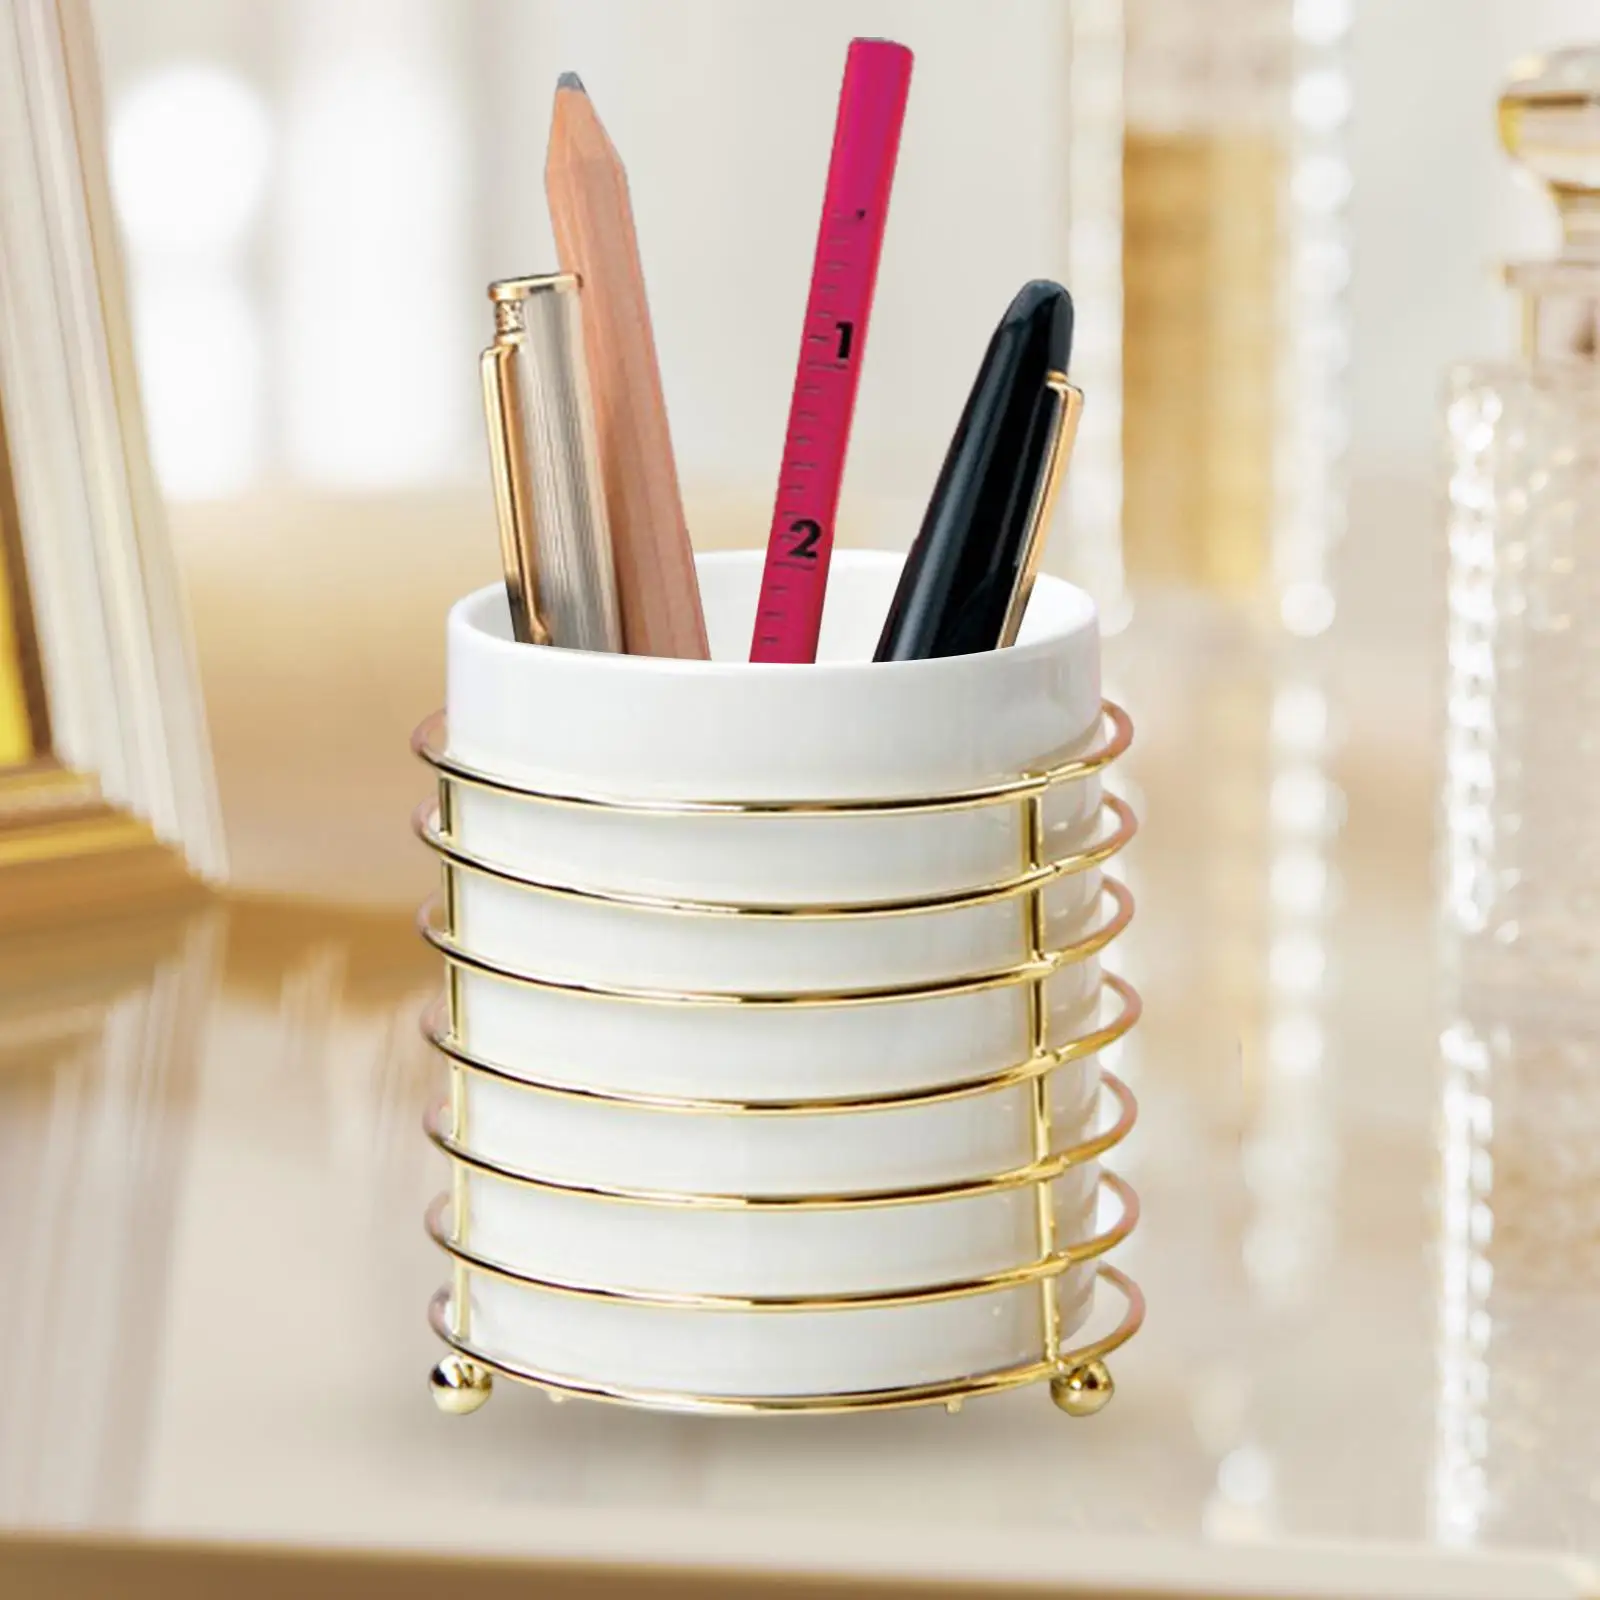 Modern Jewelry Makeup Brush Holder Container Candle Cup Desktop Storage Cup for Lipstick Pencil Pen Eyeliners Bedroom Study Room